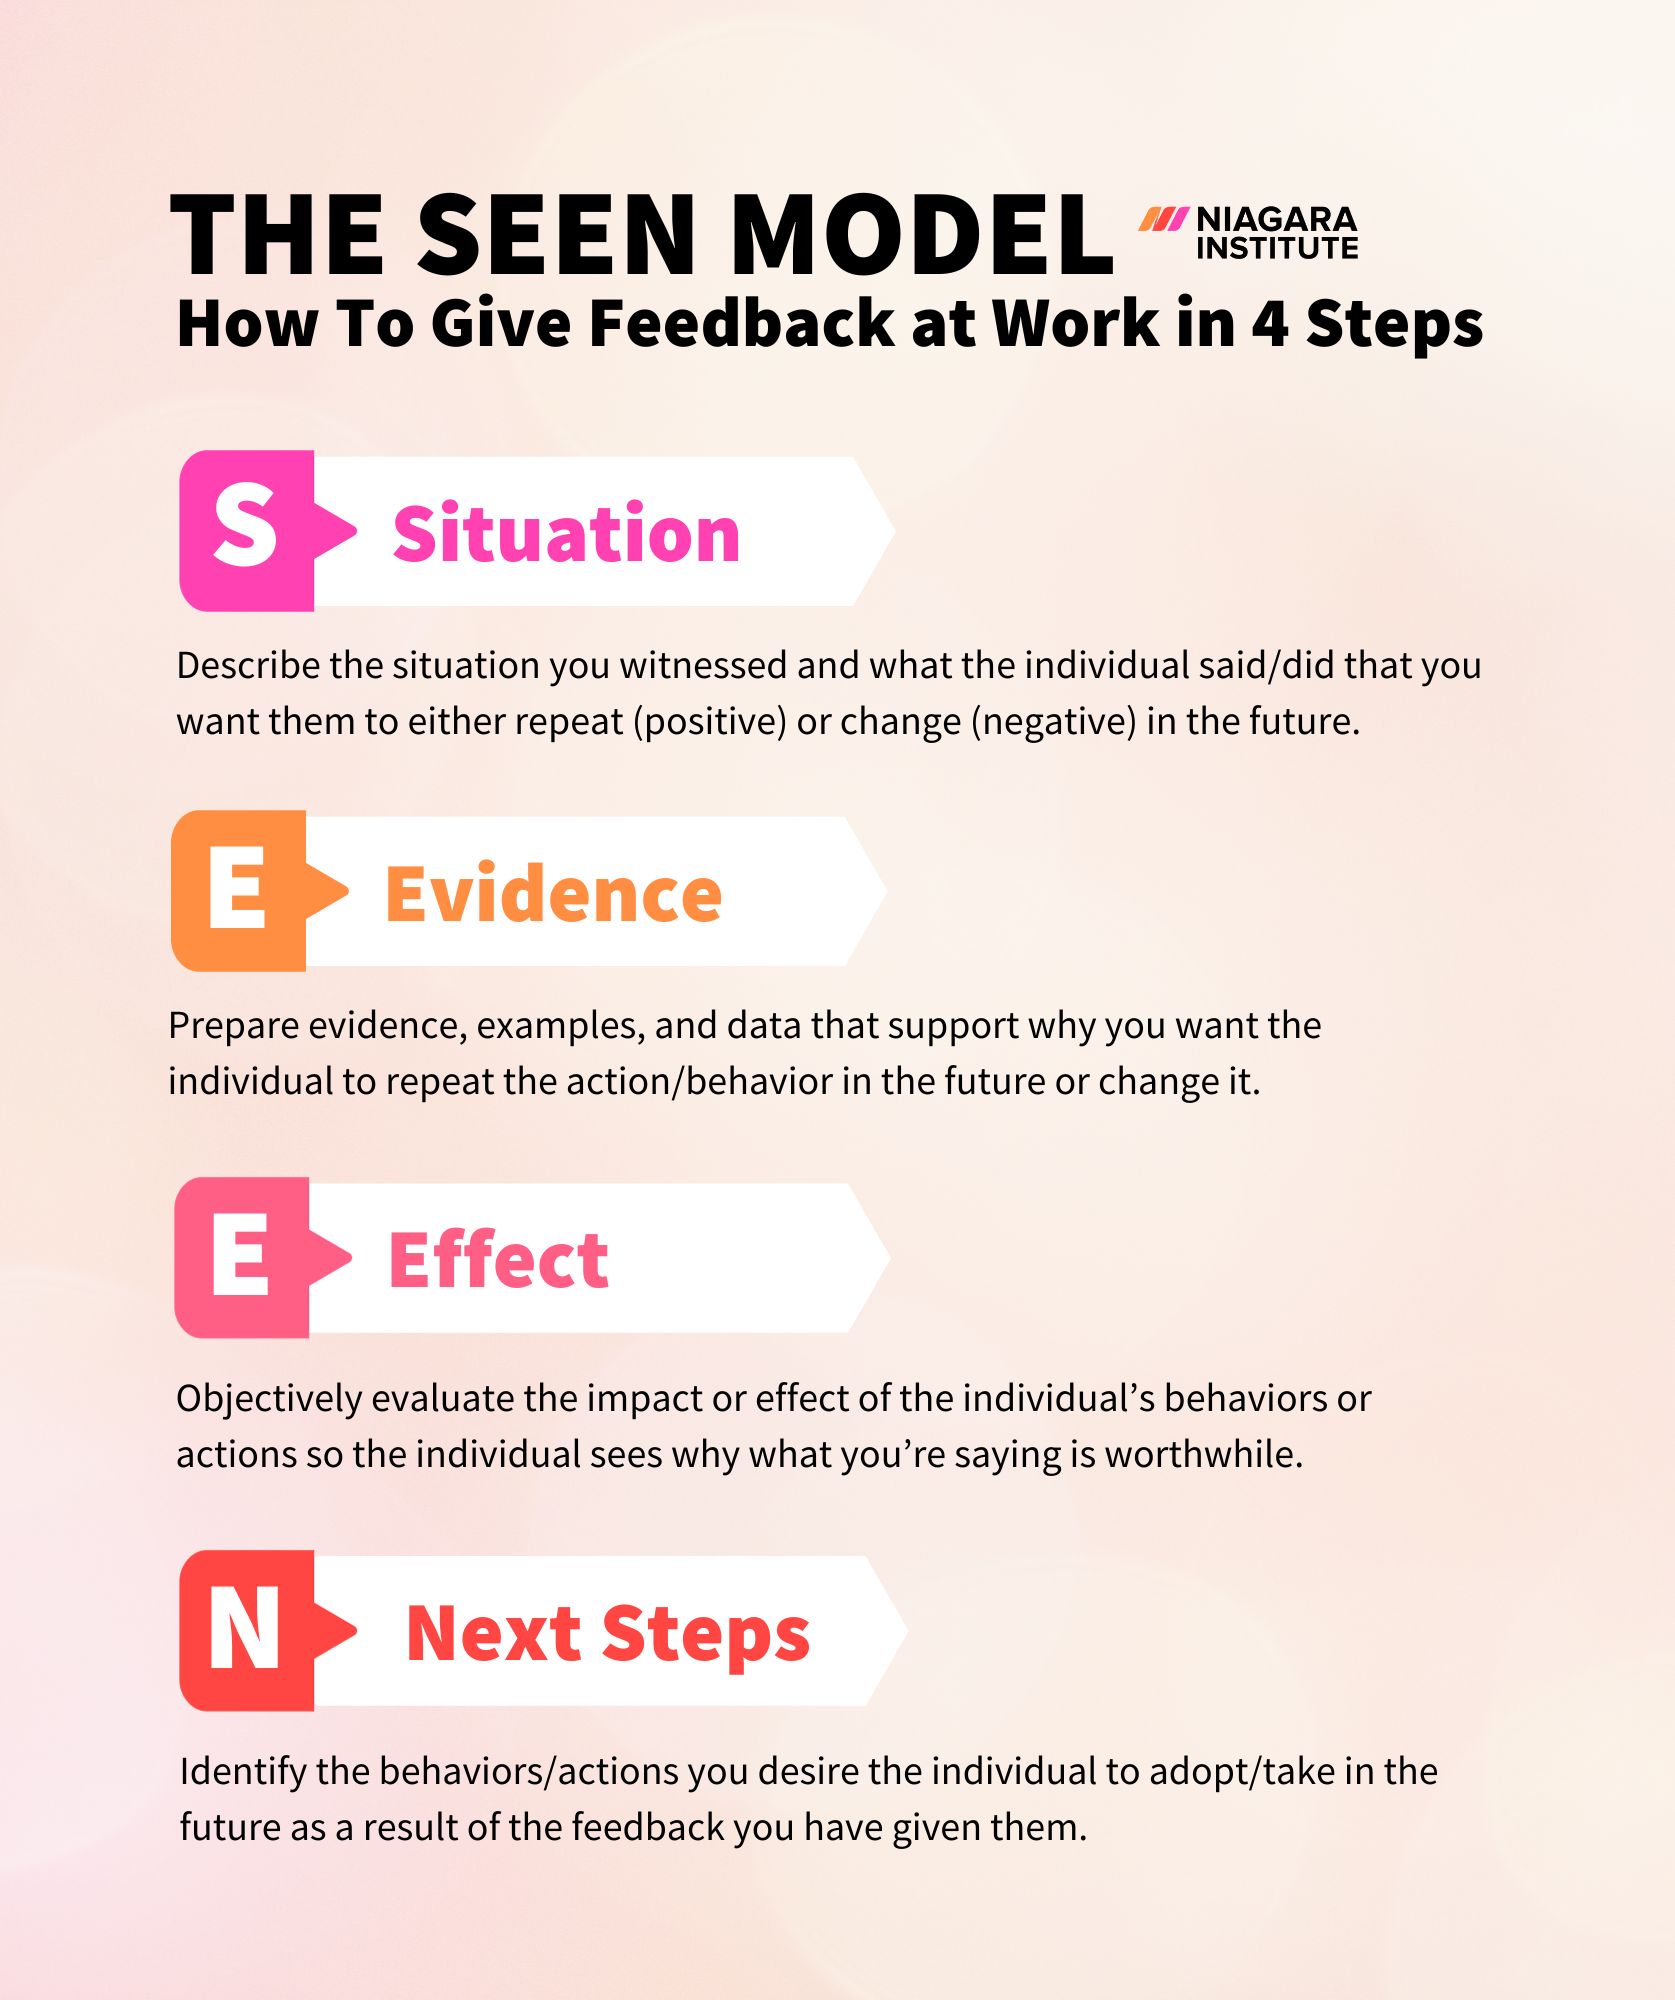 The SEEN Model for Giving Feedback in the Workplace - Niagara Institute